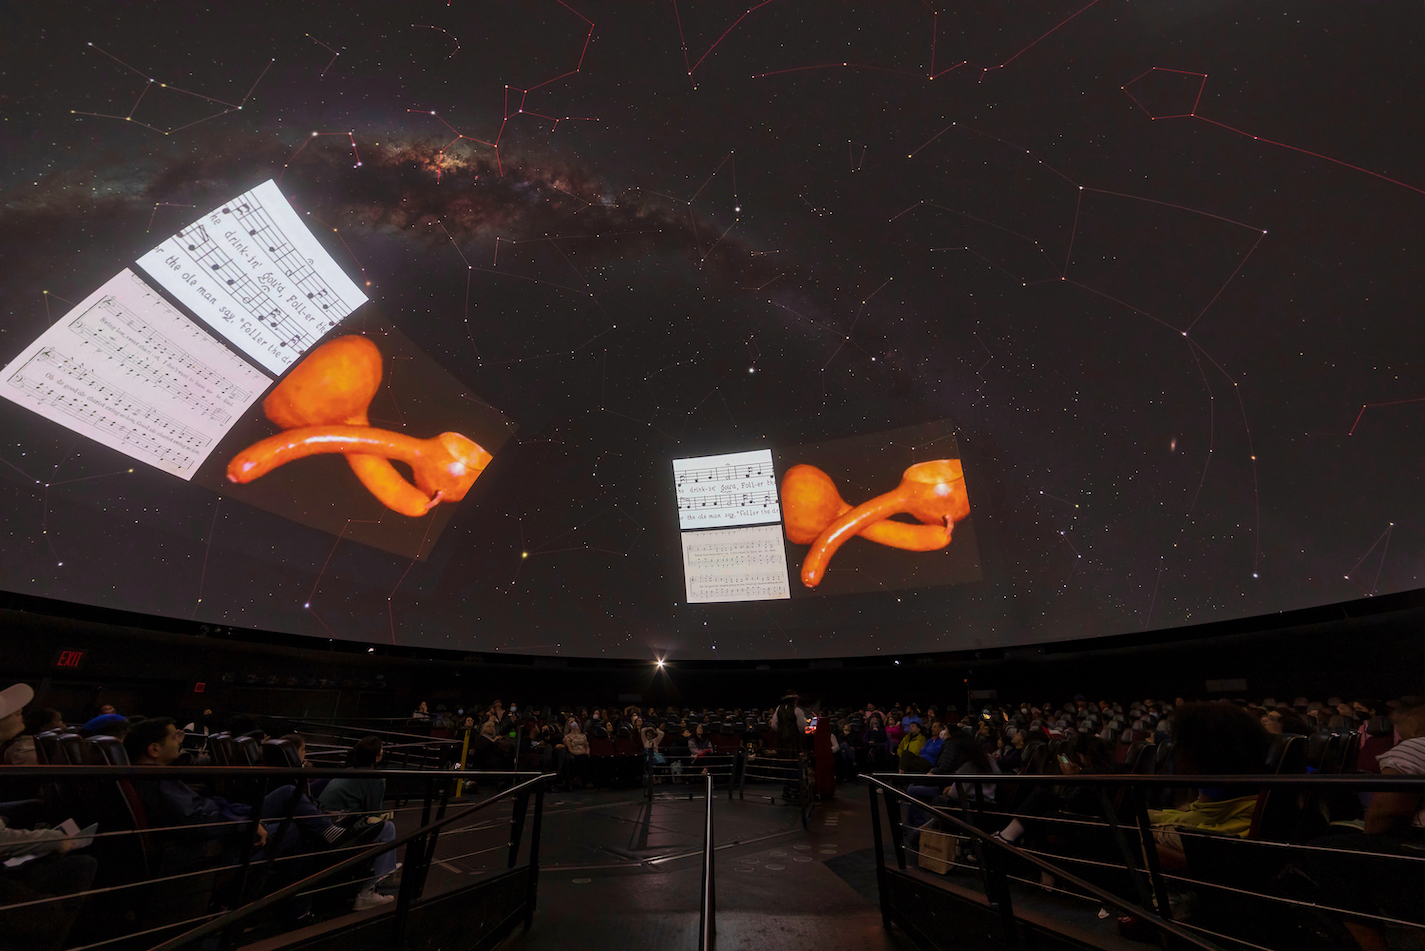 The Hayden Planetarium filled with seated guests. Above them, the planetarium dome shows the constellations with slides of sheet music and drinking gourds superimposed.